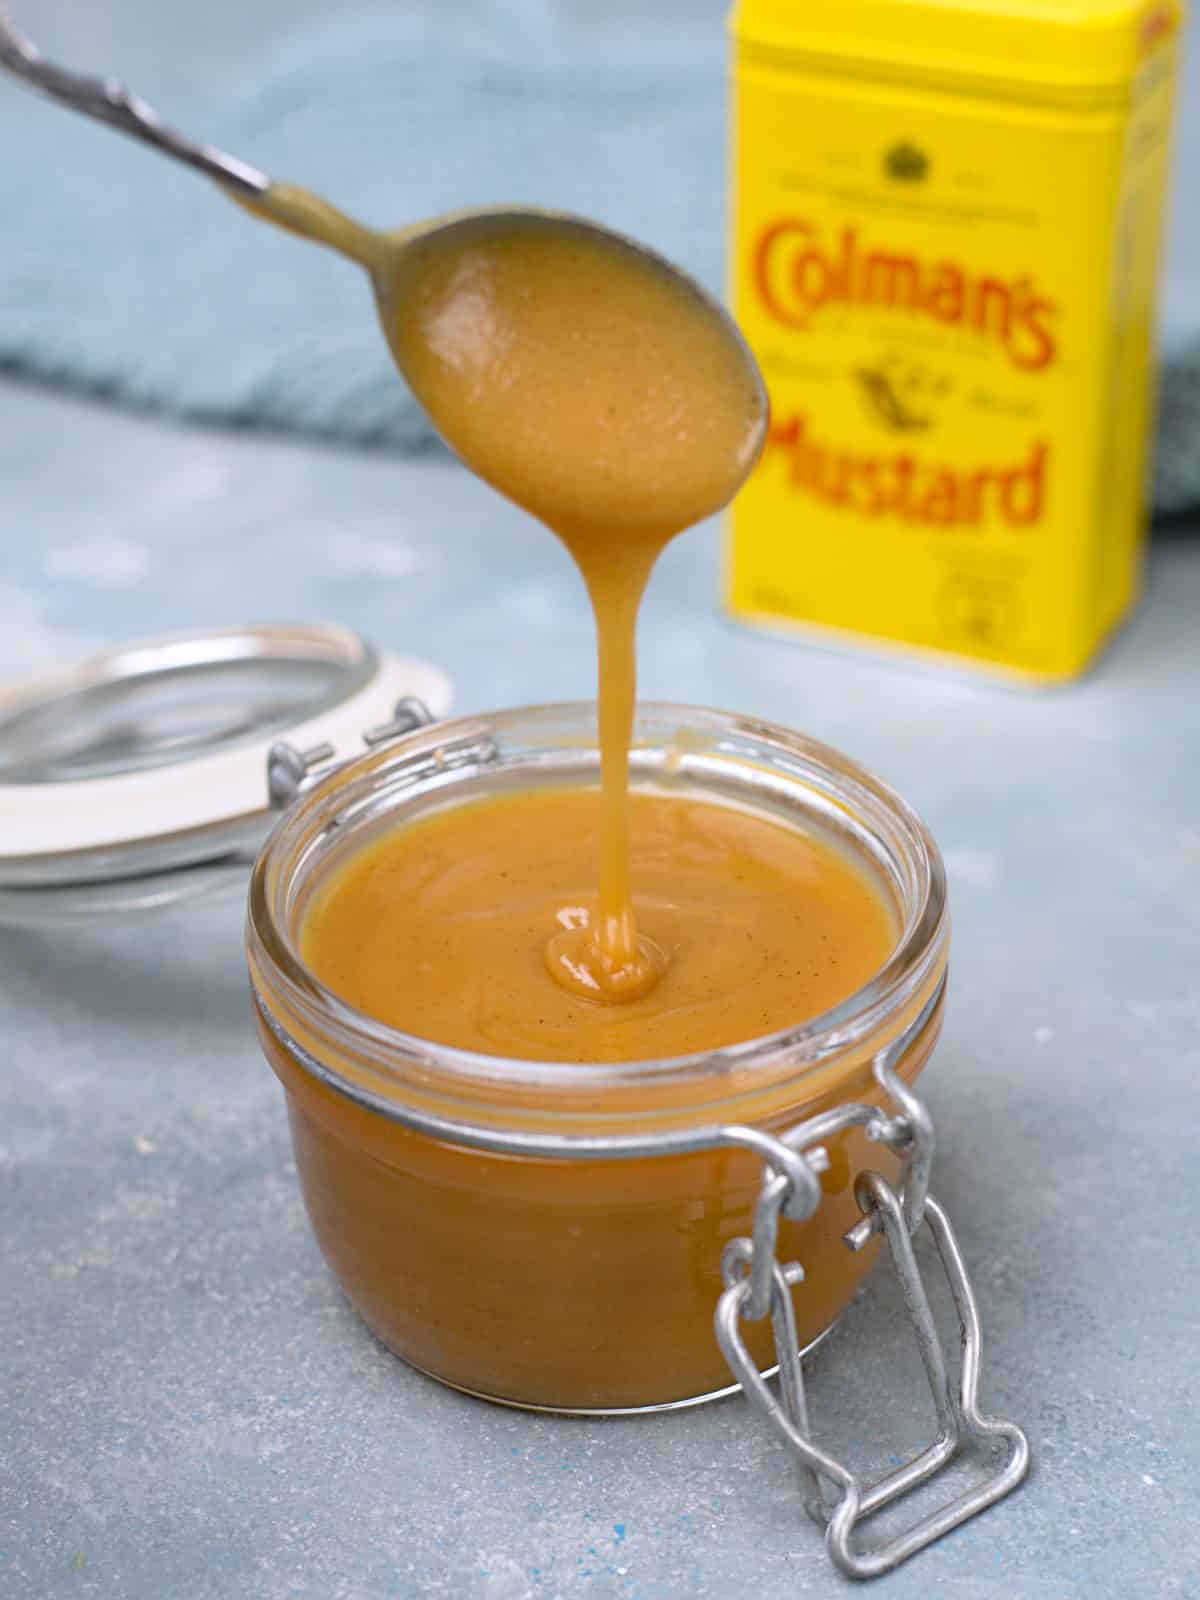 Yellow mustard powder packet and readymade mustard shown consistency by dripping it with spoon. 